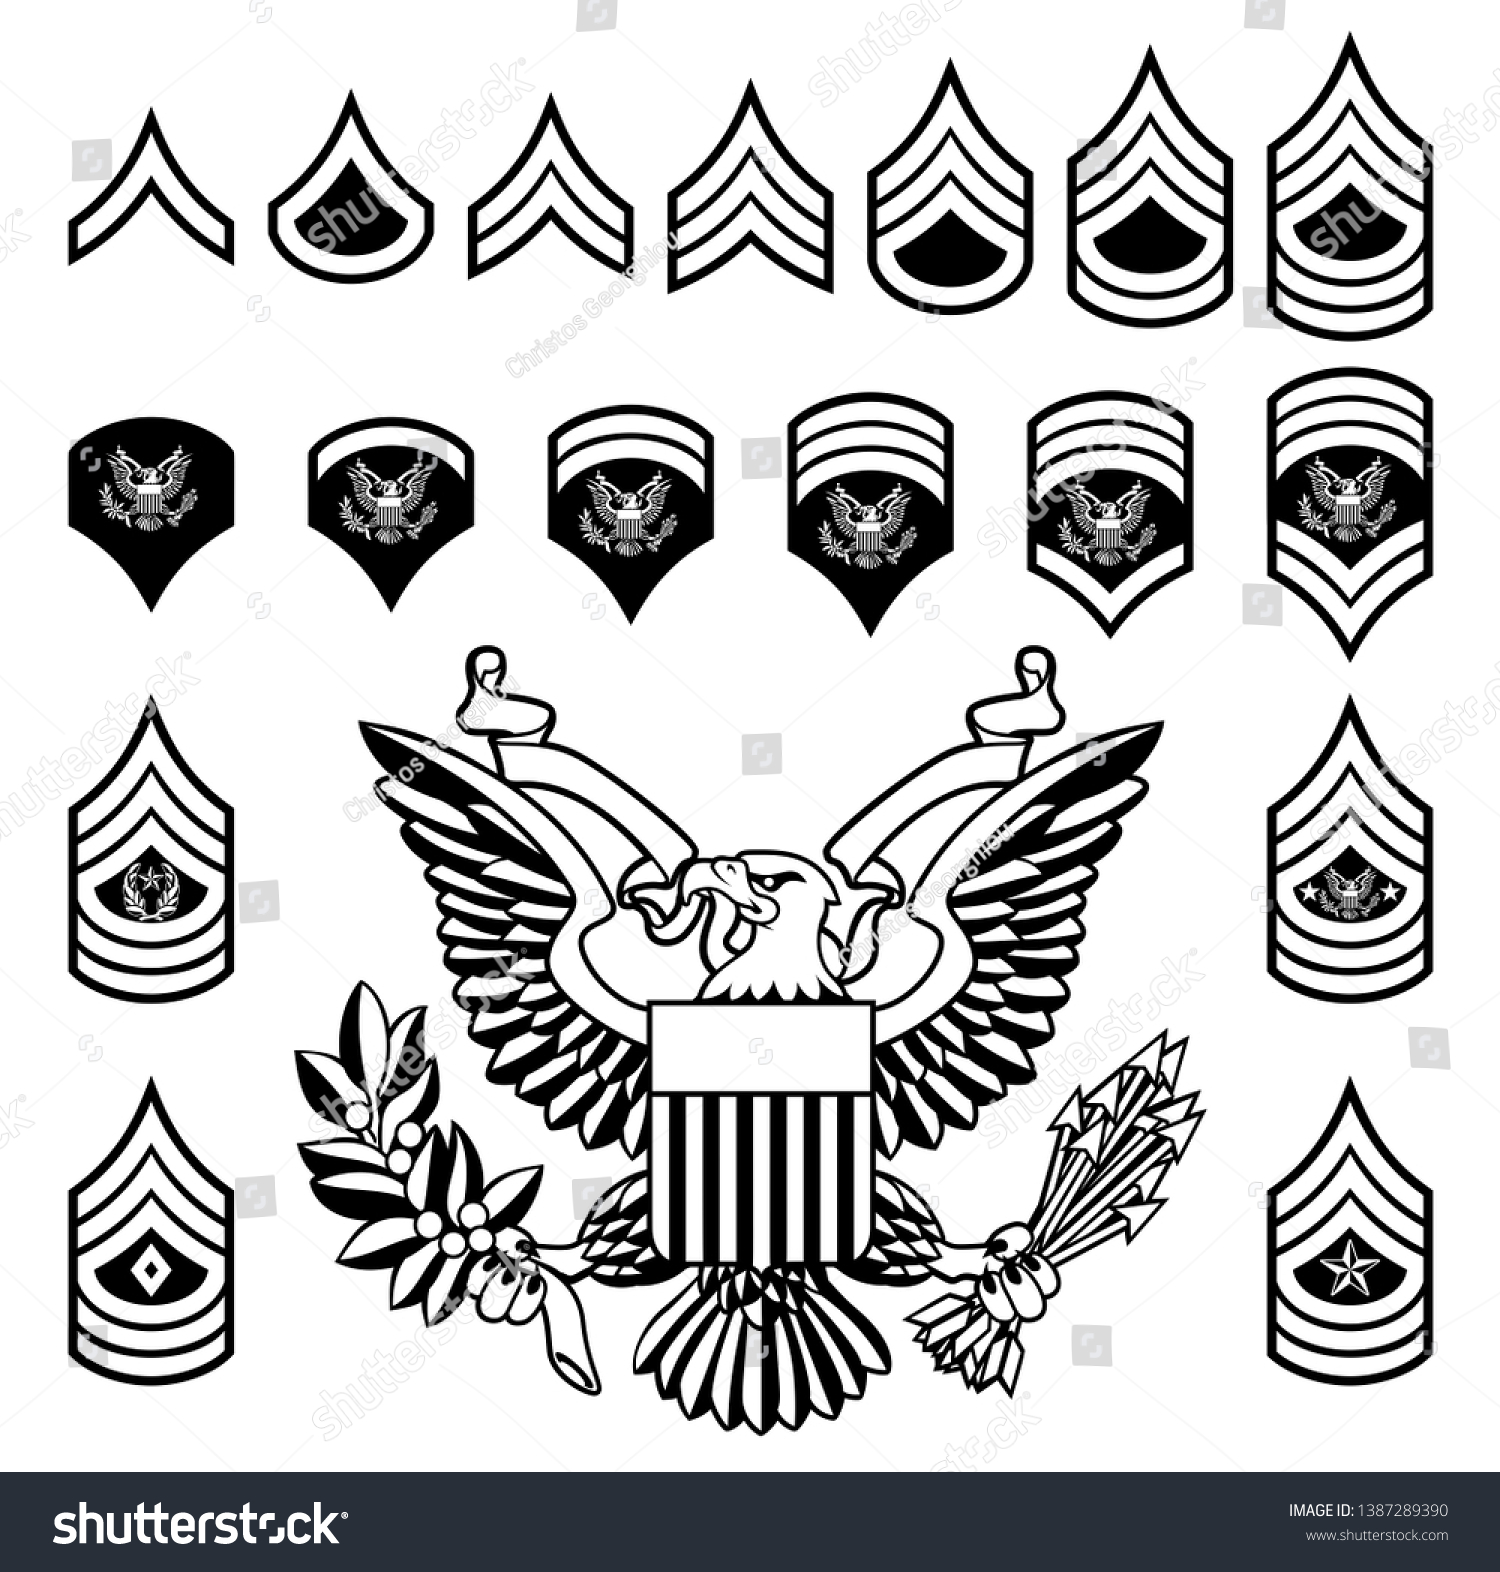 Set Military American Enlisted Army Ranks Stock Illustration 1387289390 ...